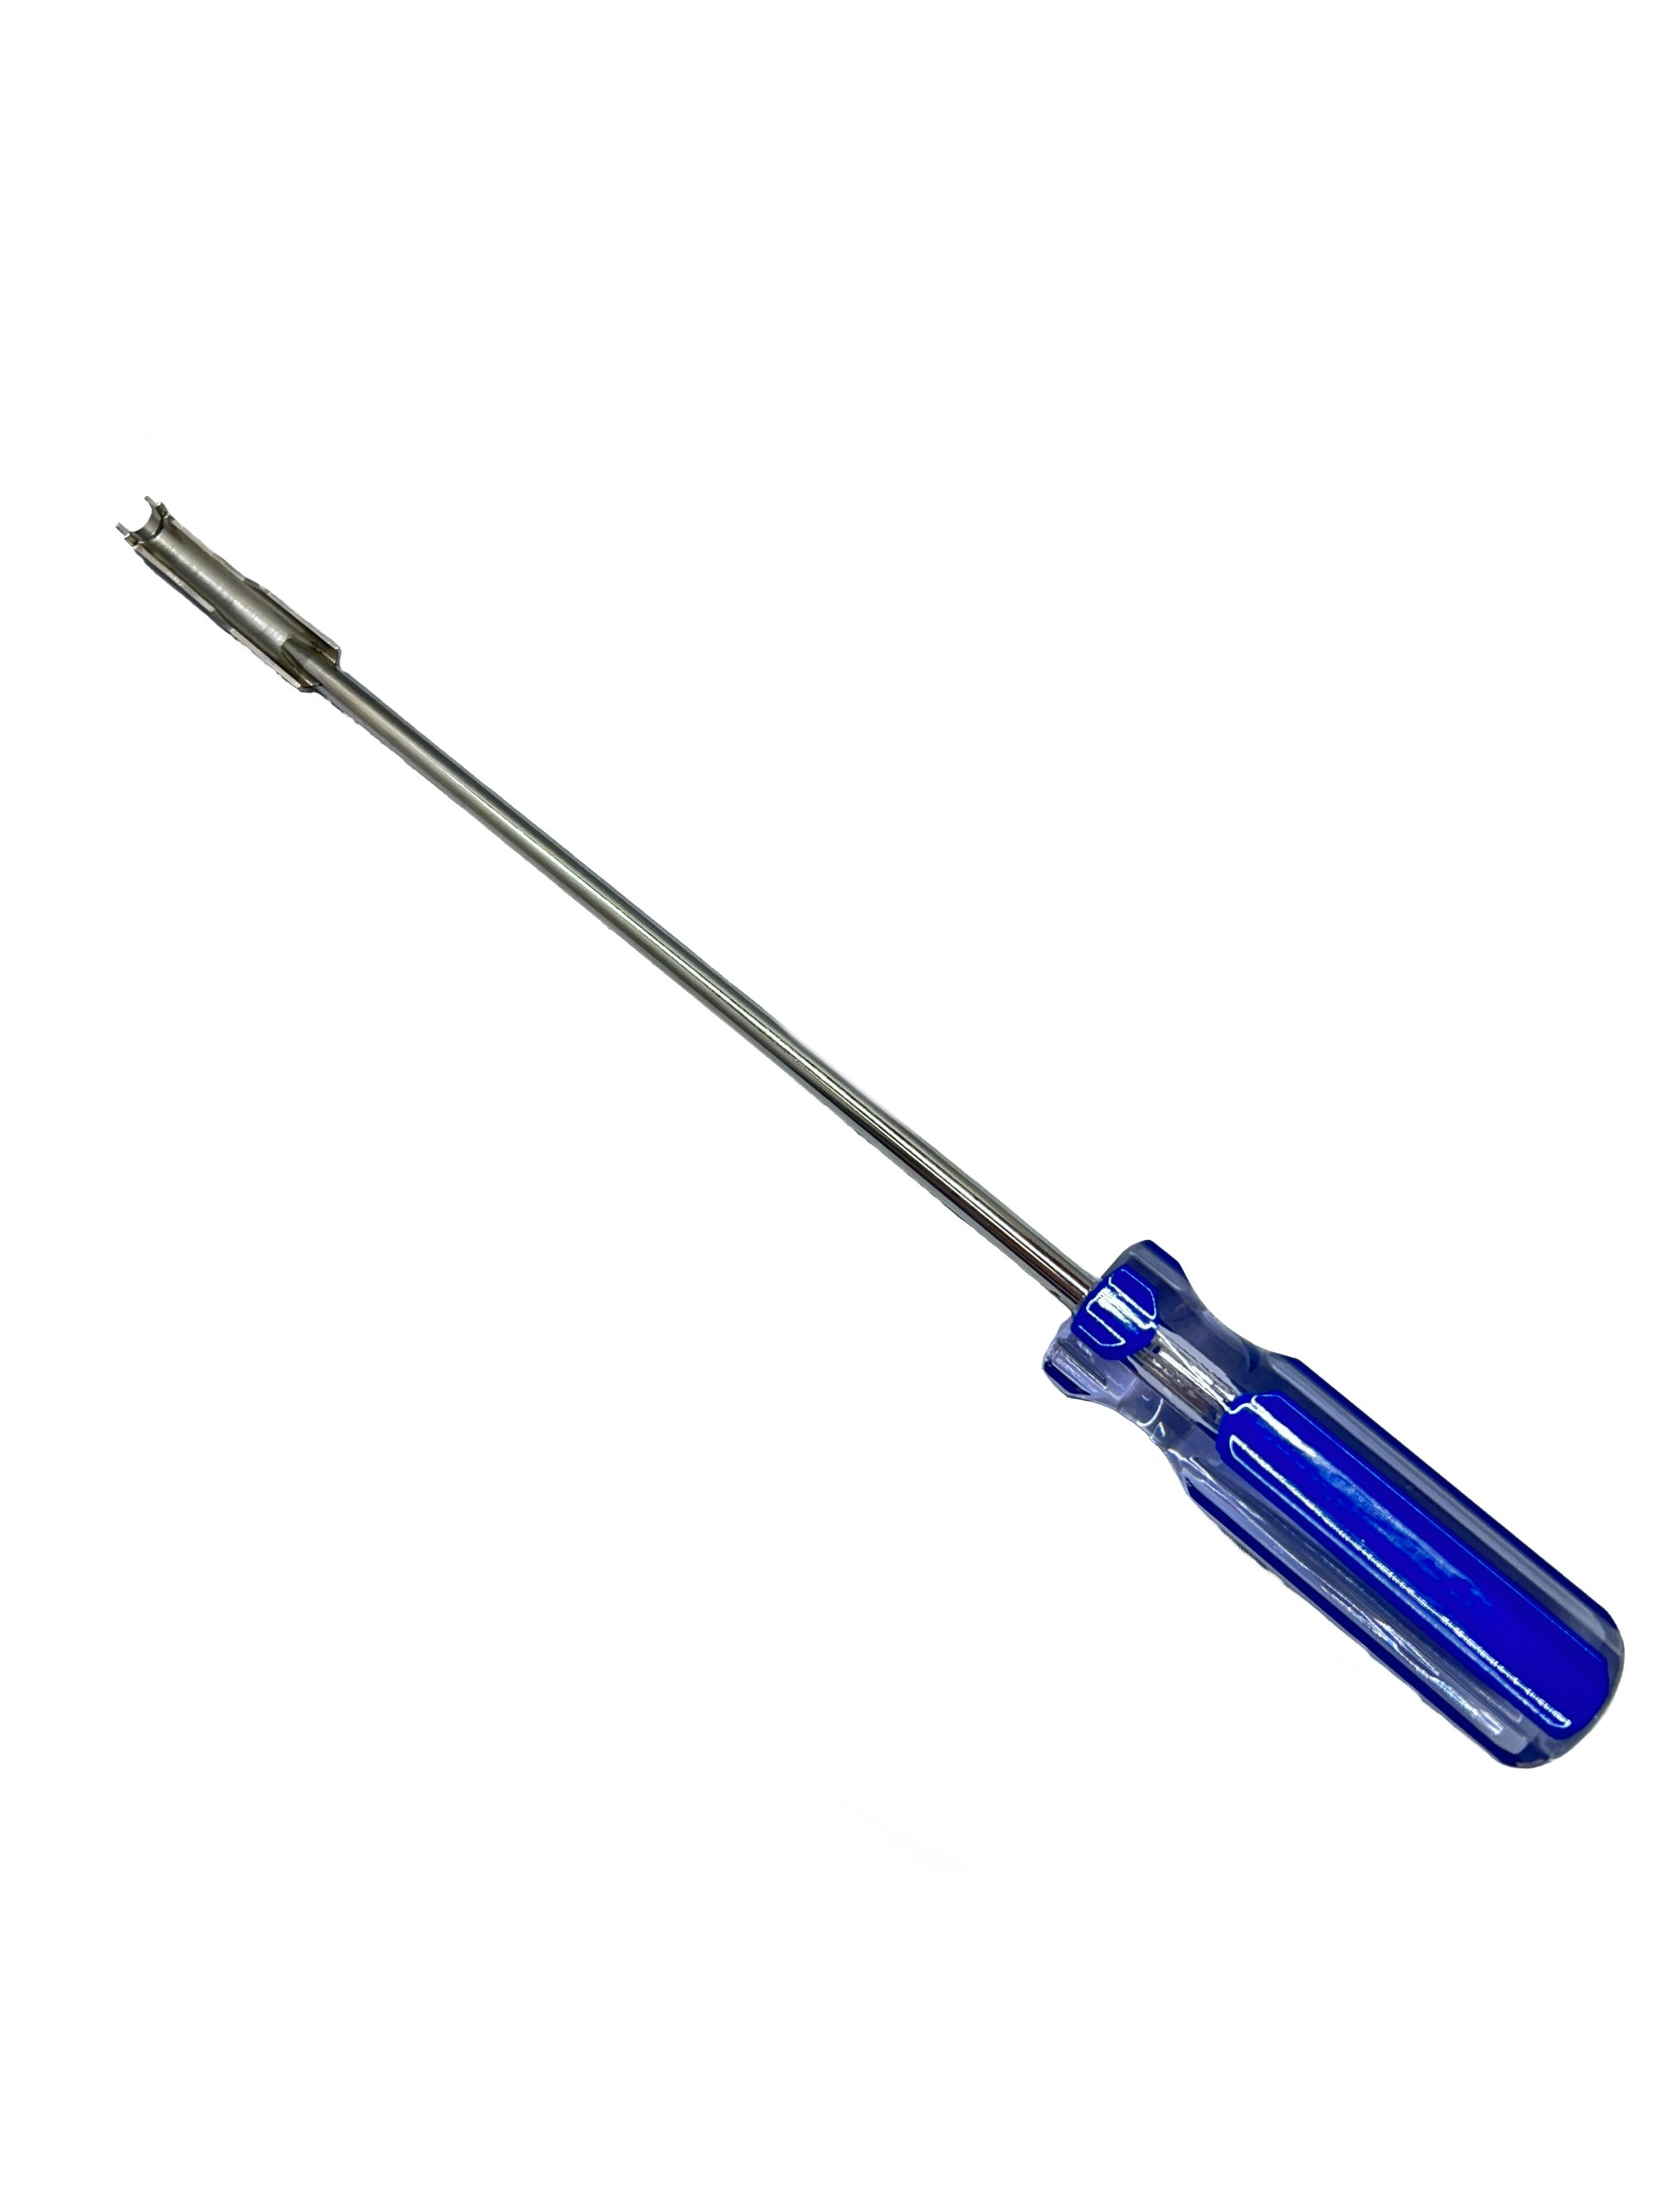 HD BNC Series Installation and Removal Tool